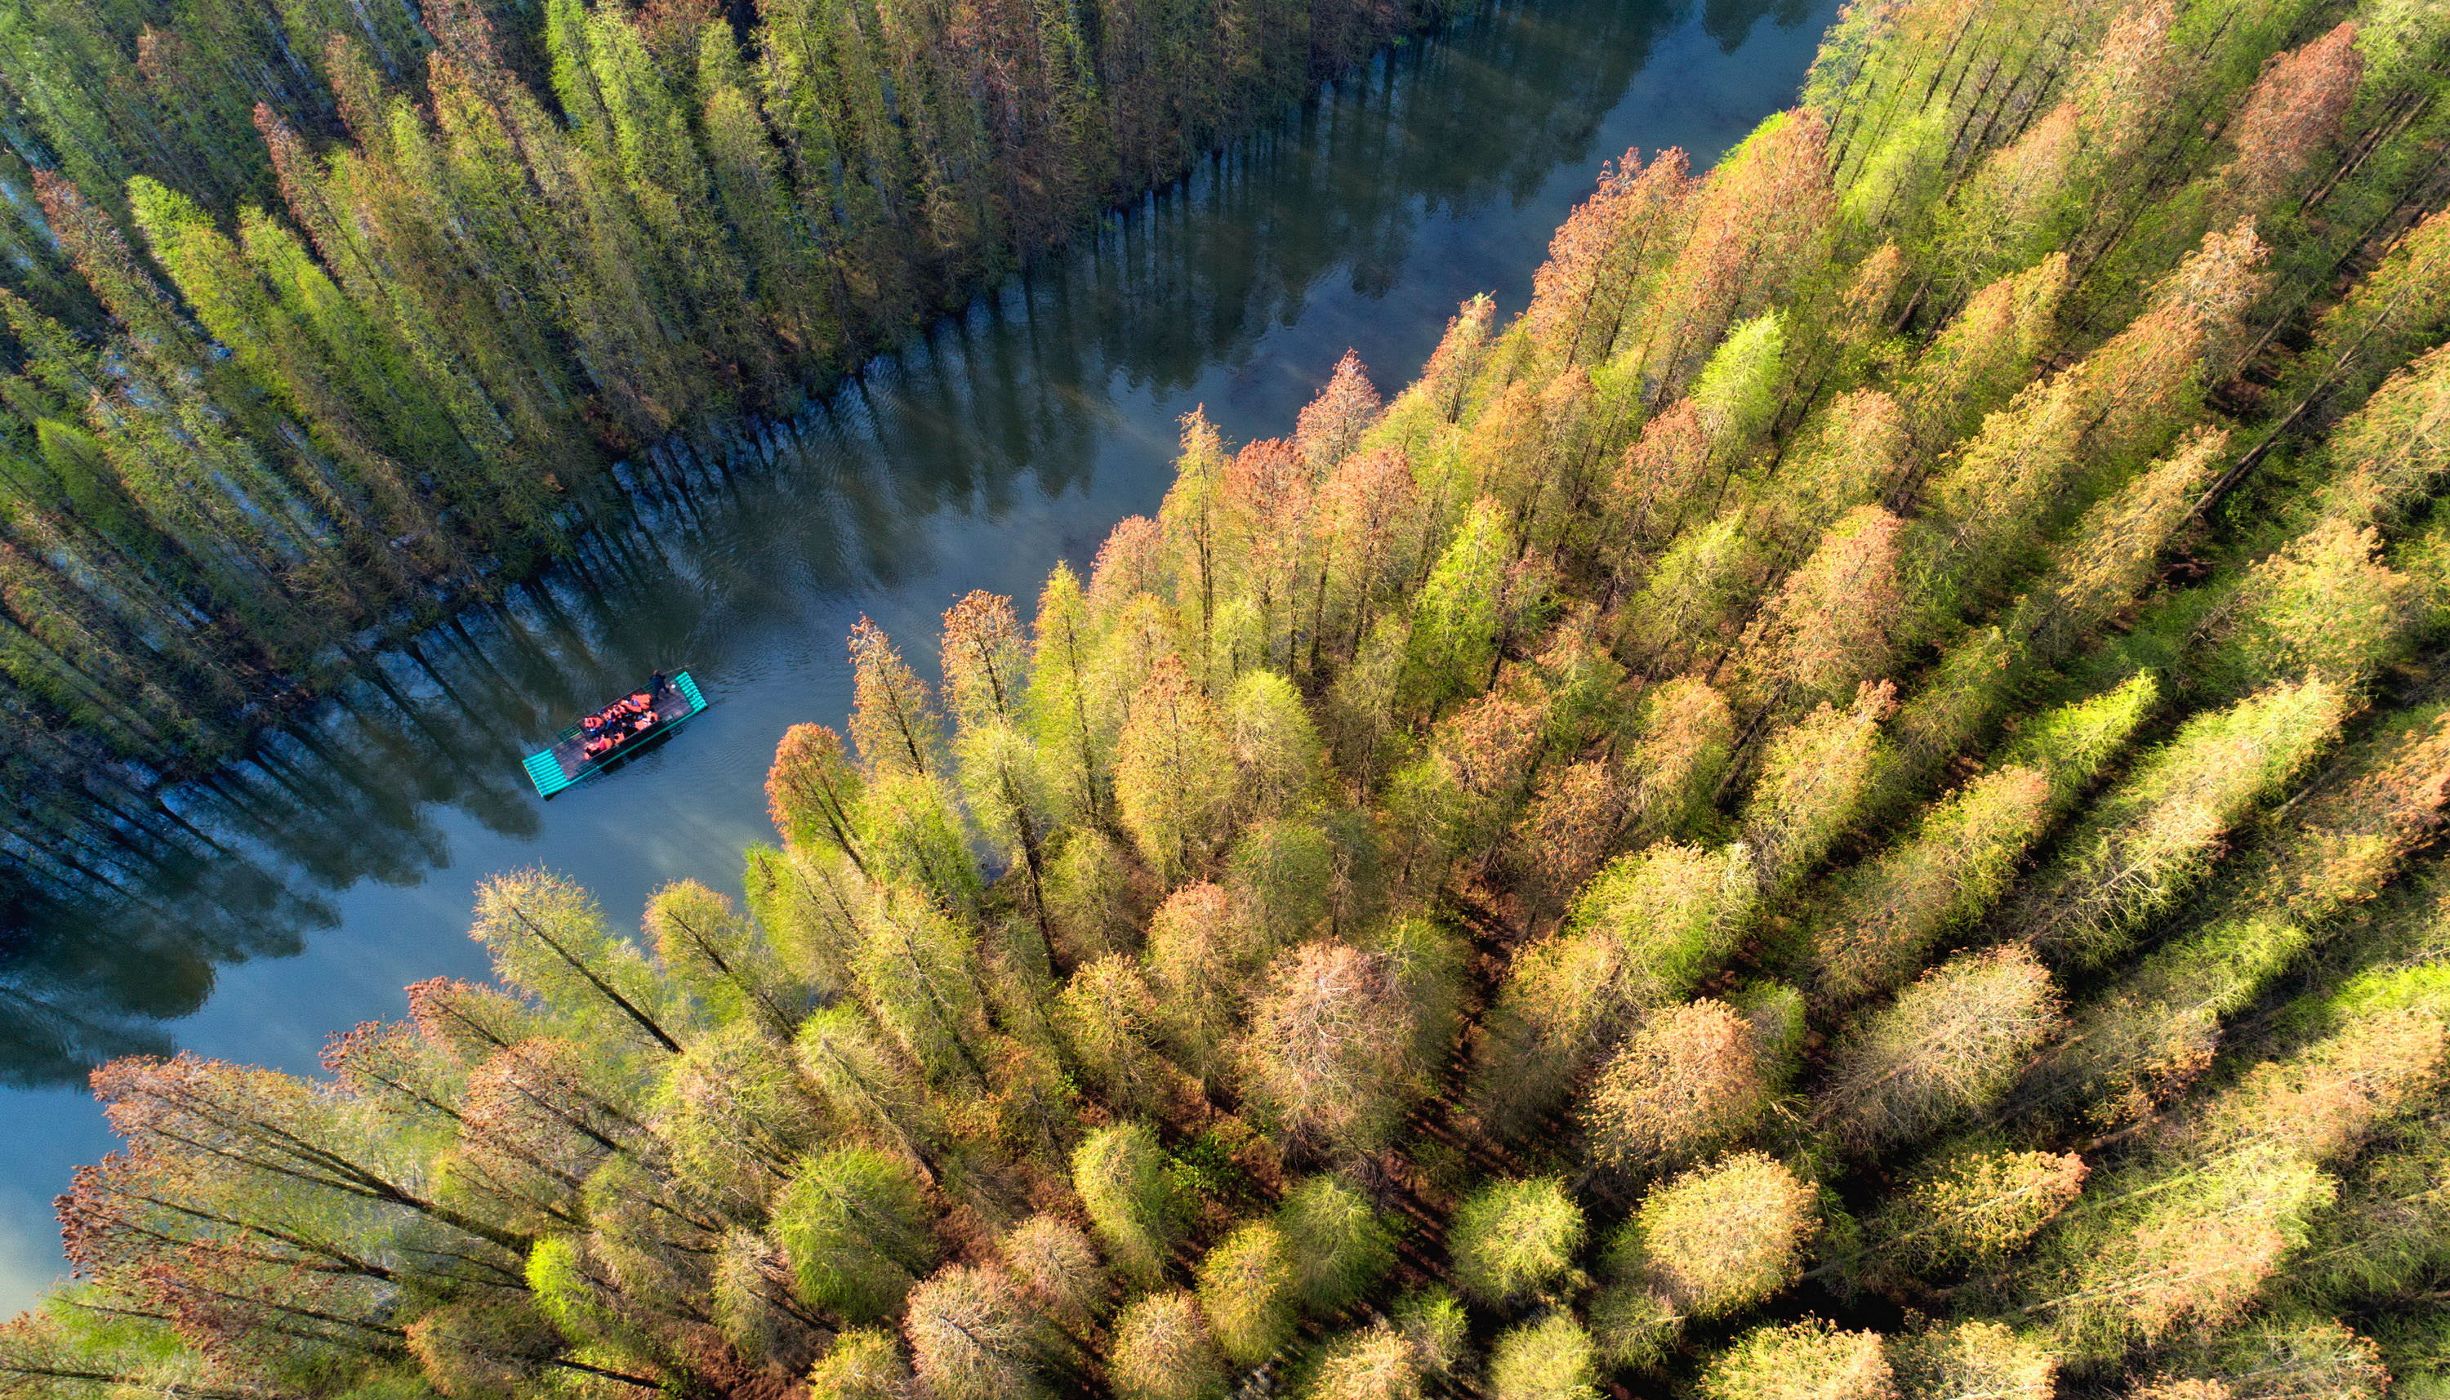 River cuts through the forest in China